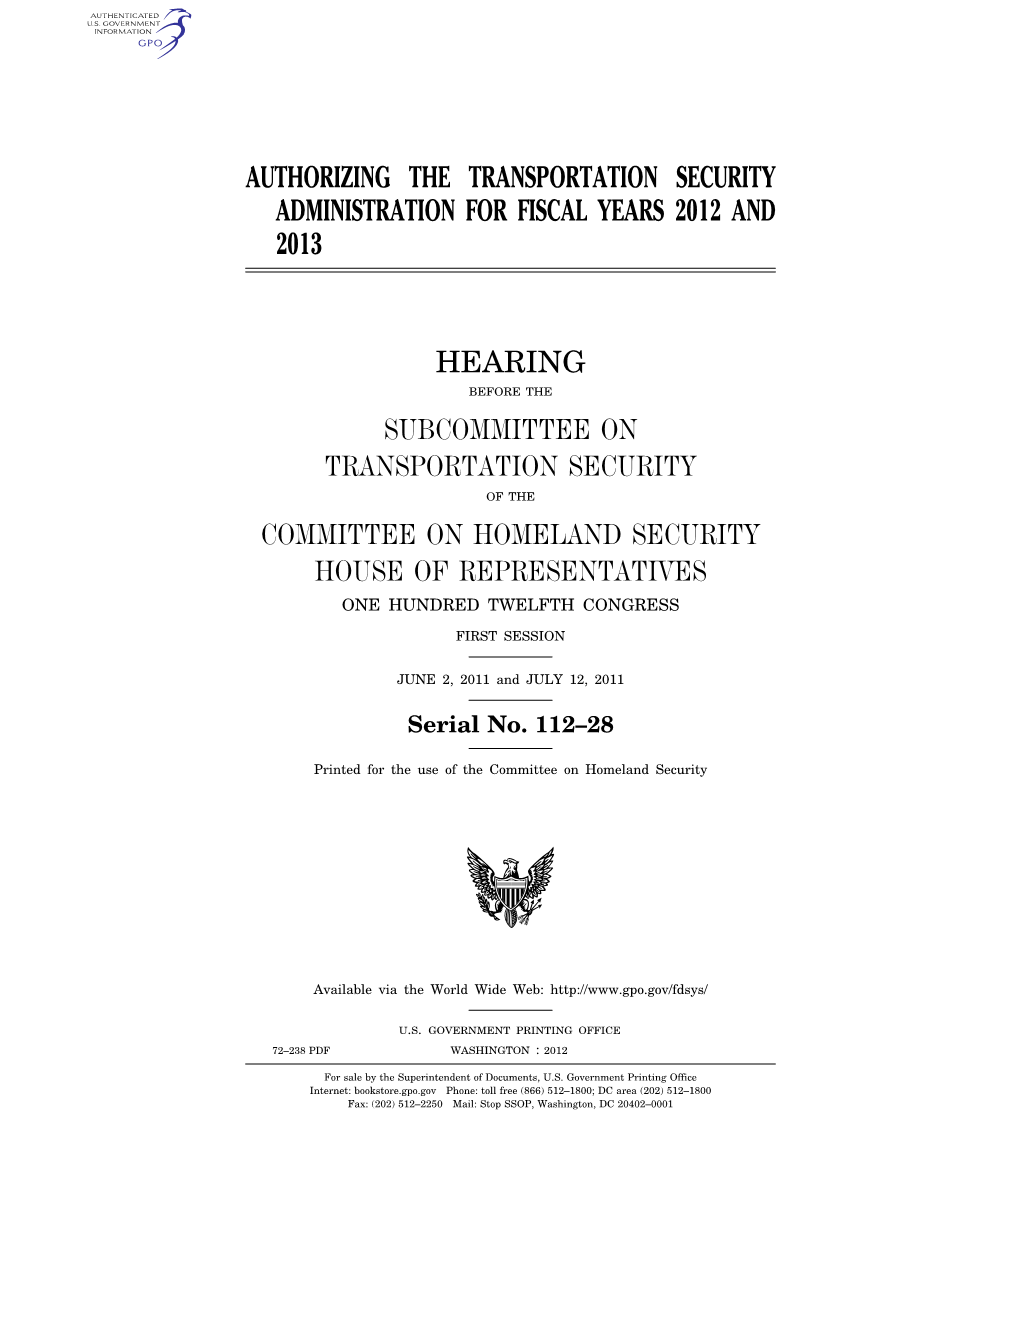 Authorizing the Transportation Security Administration for Fiscal Years 2012 and 2013